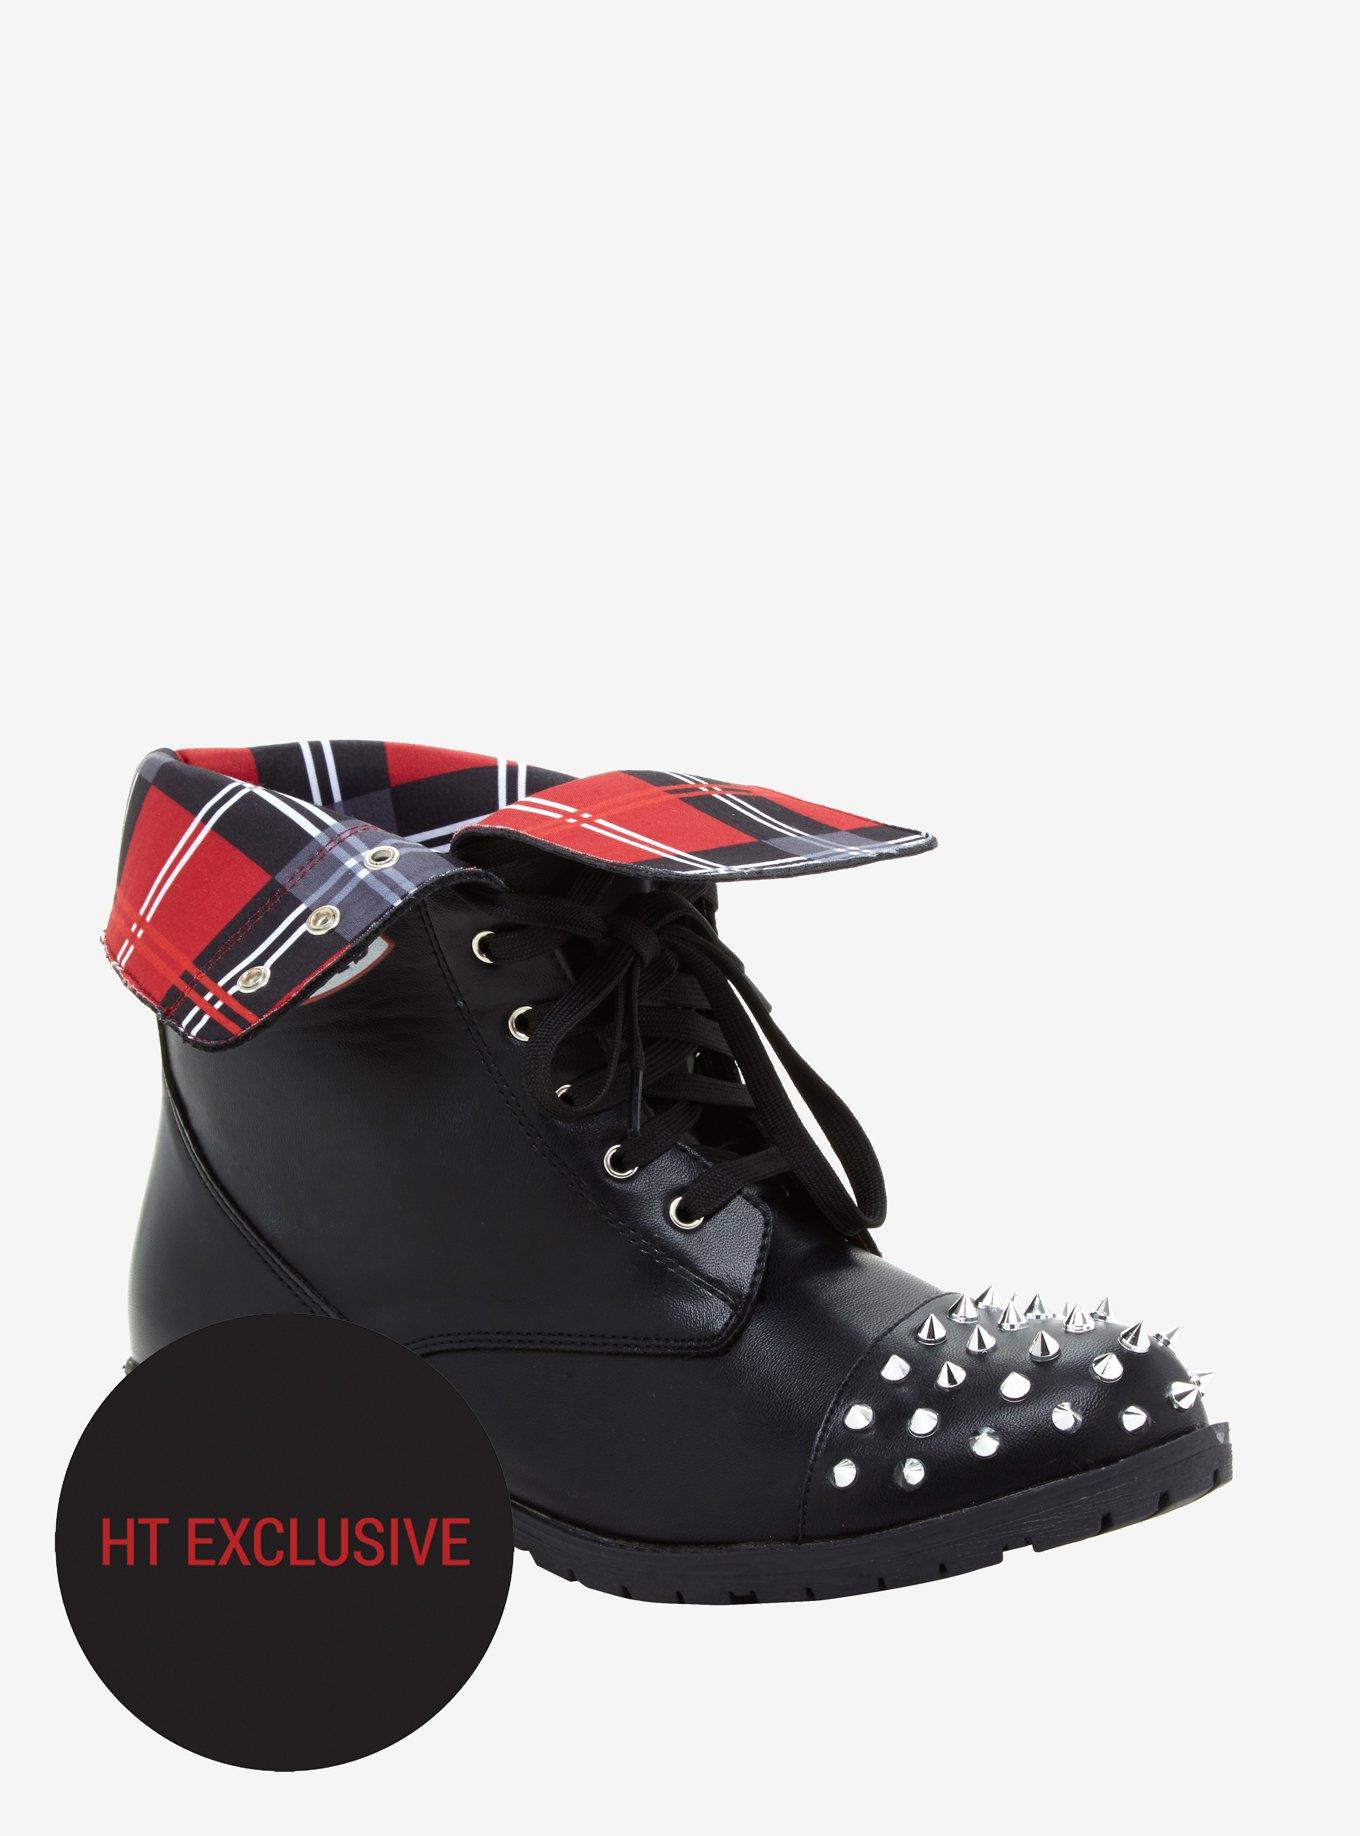 Riverdale Southside Serpents Studded Fold-Over Boots Hot Topic Exclusive, MULTI, hi-res